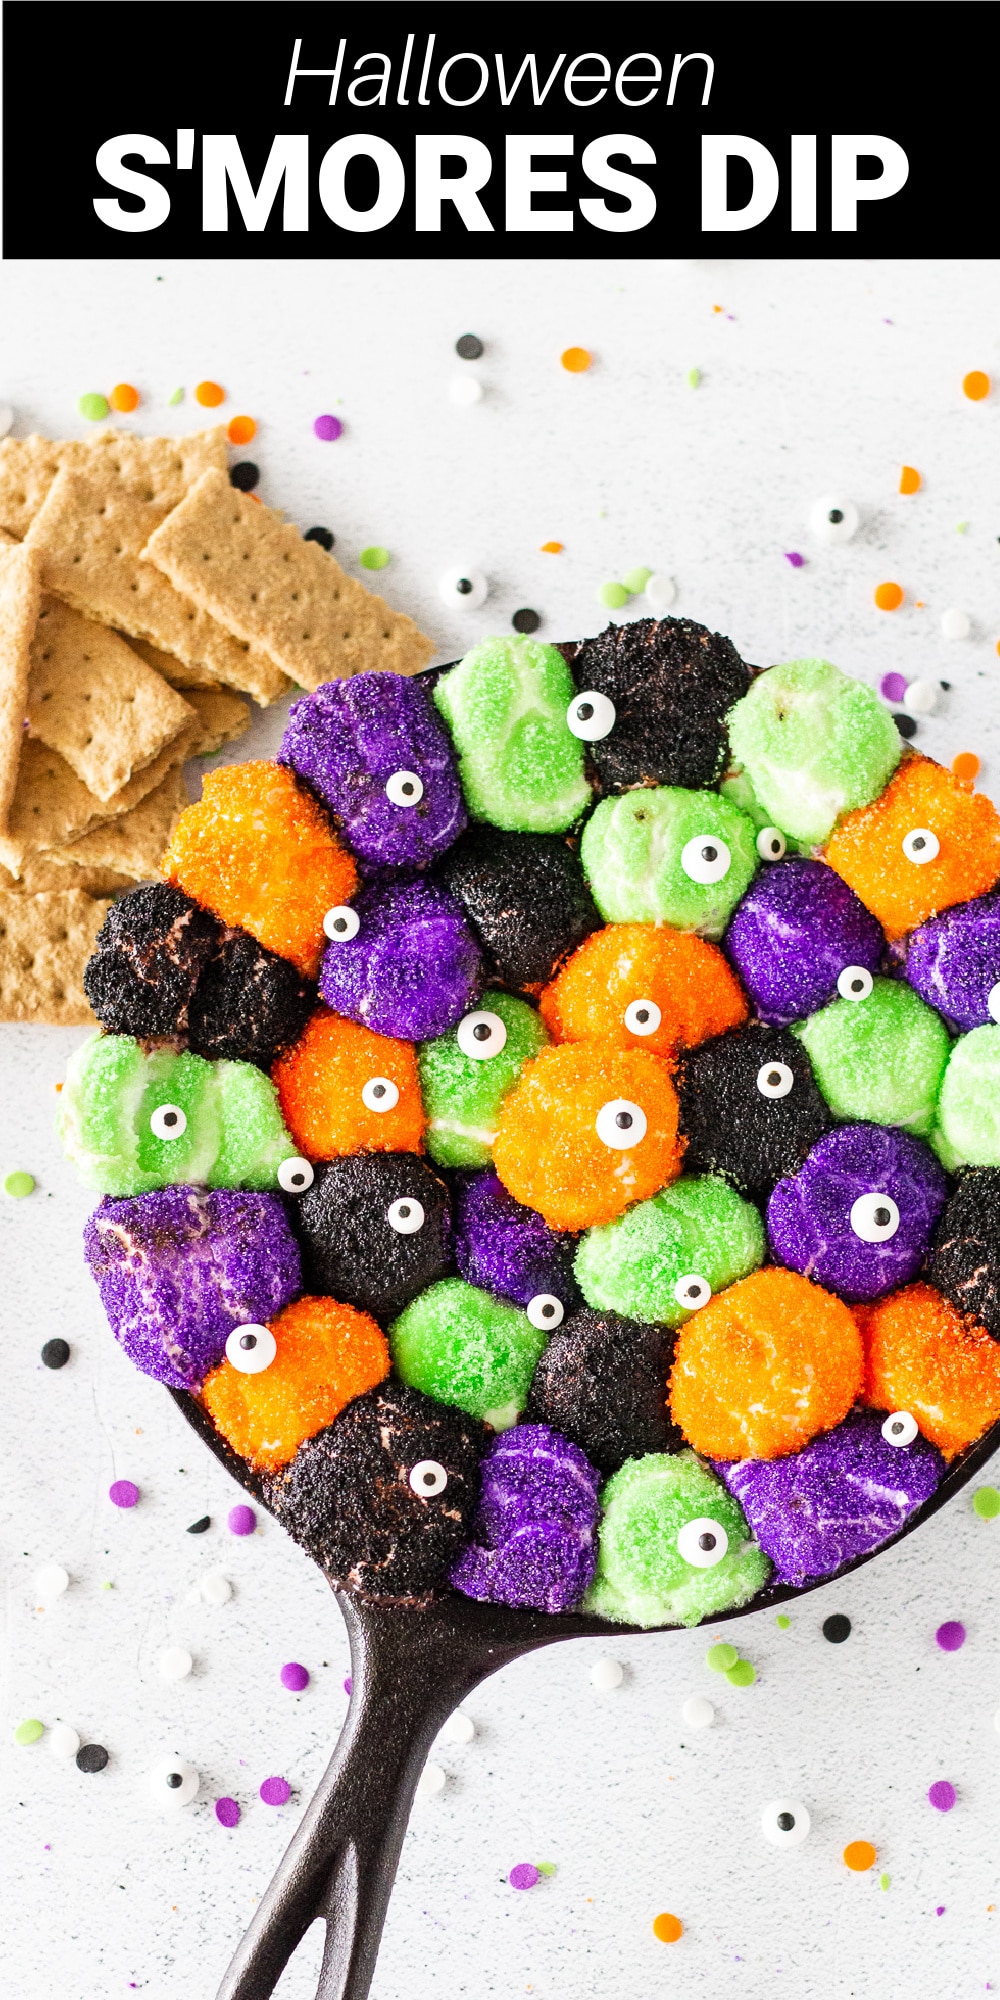 This easy Halloween s’mores dip is the perfect colorful Halloween dessert that combines creamy chocolate, fluffy marshmallows, and graham crackers to make the most fun Halloween treat in under 10 minutes. 